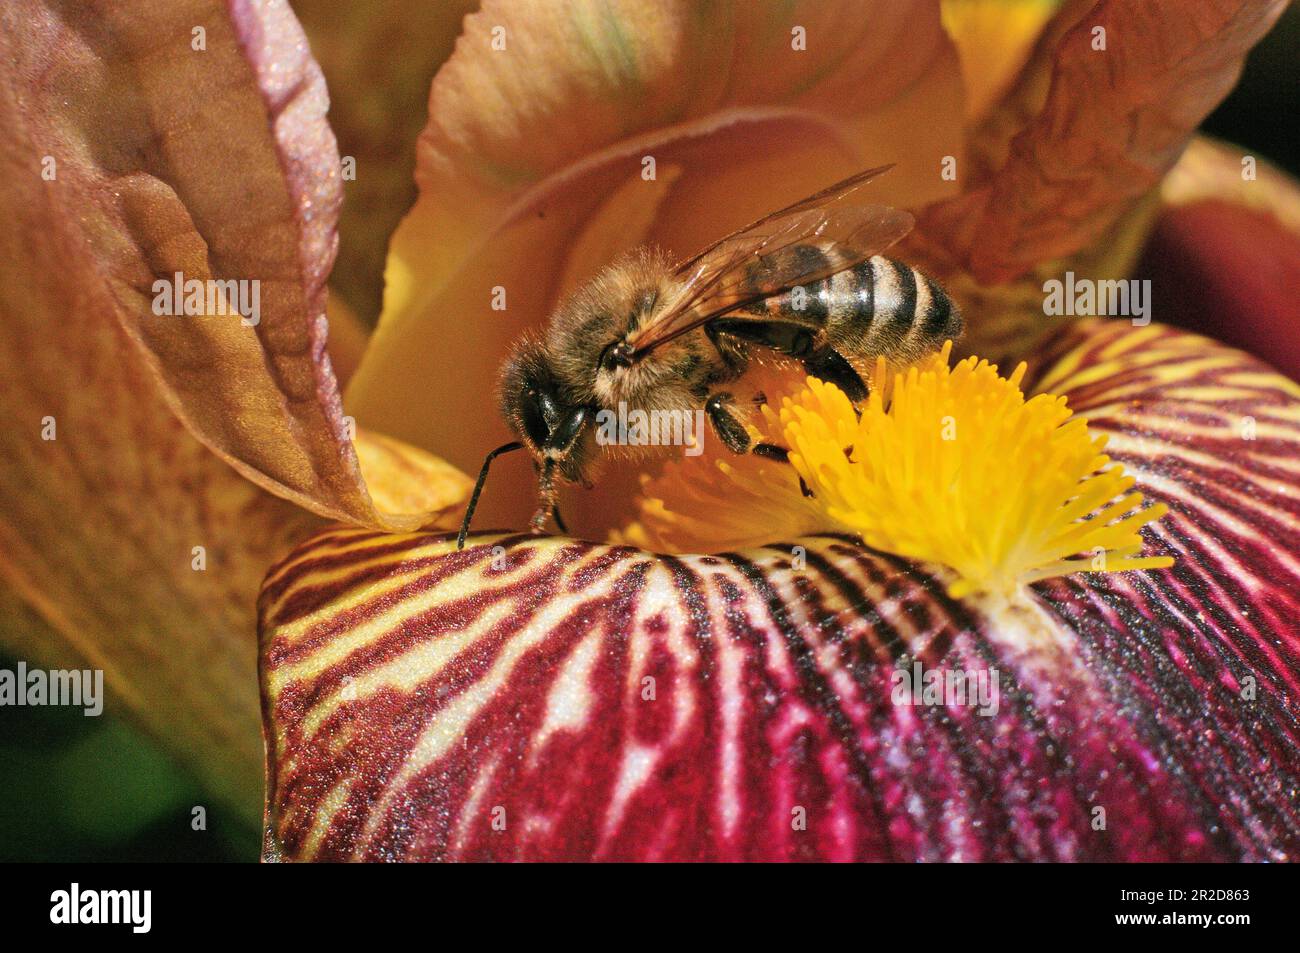 Around the UK - A Honey Bee collecting pollen from an Iris flower Stock Photo